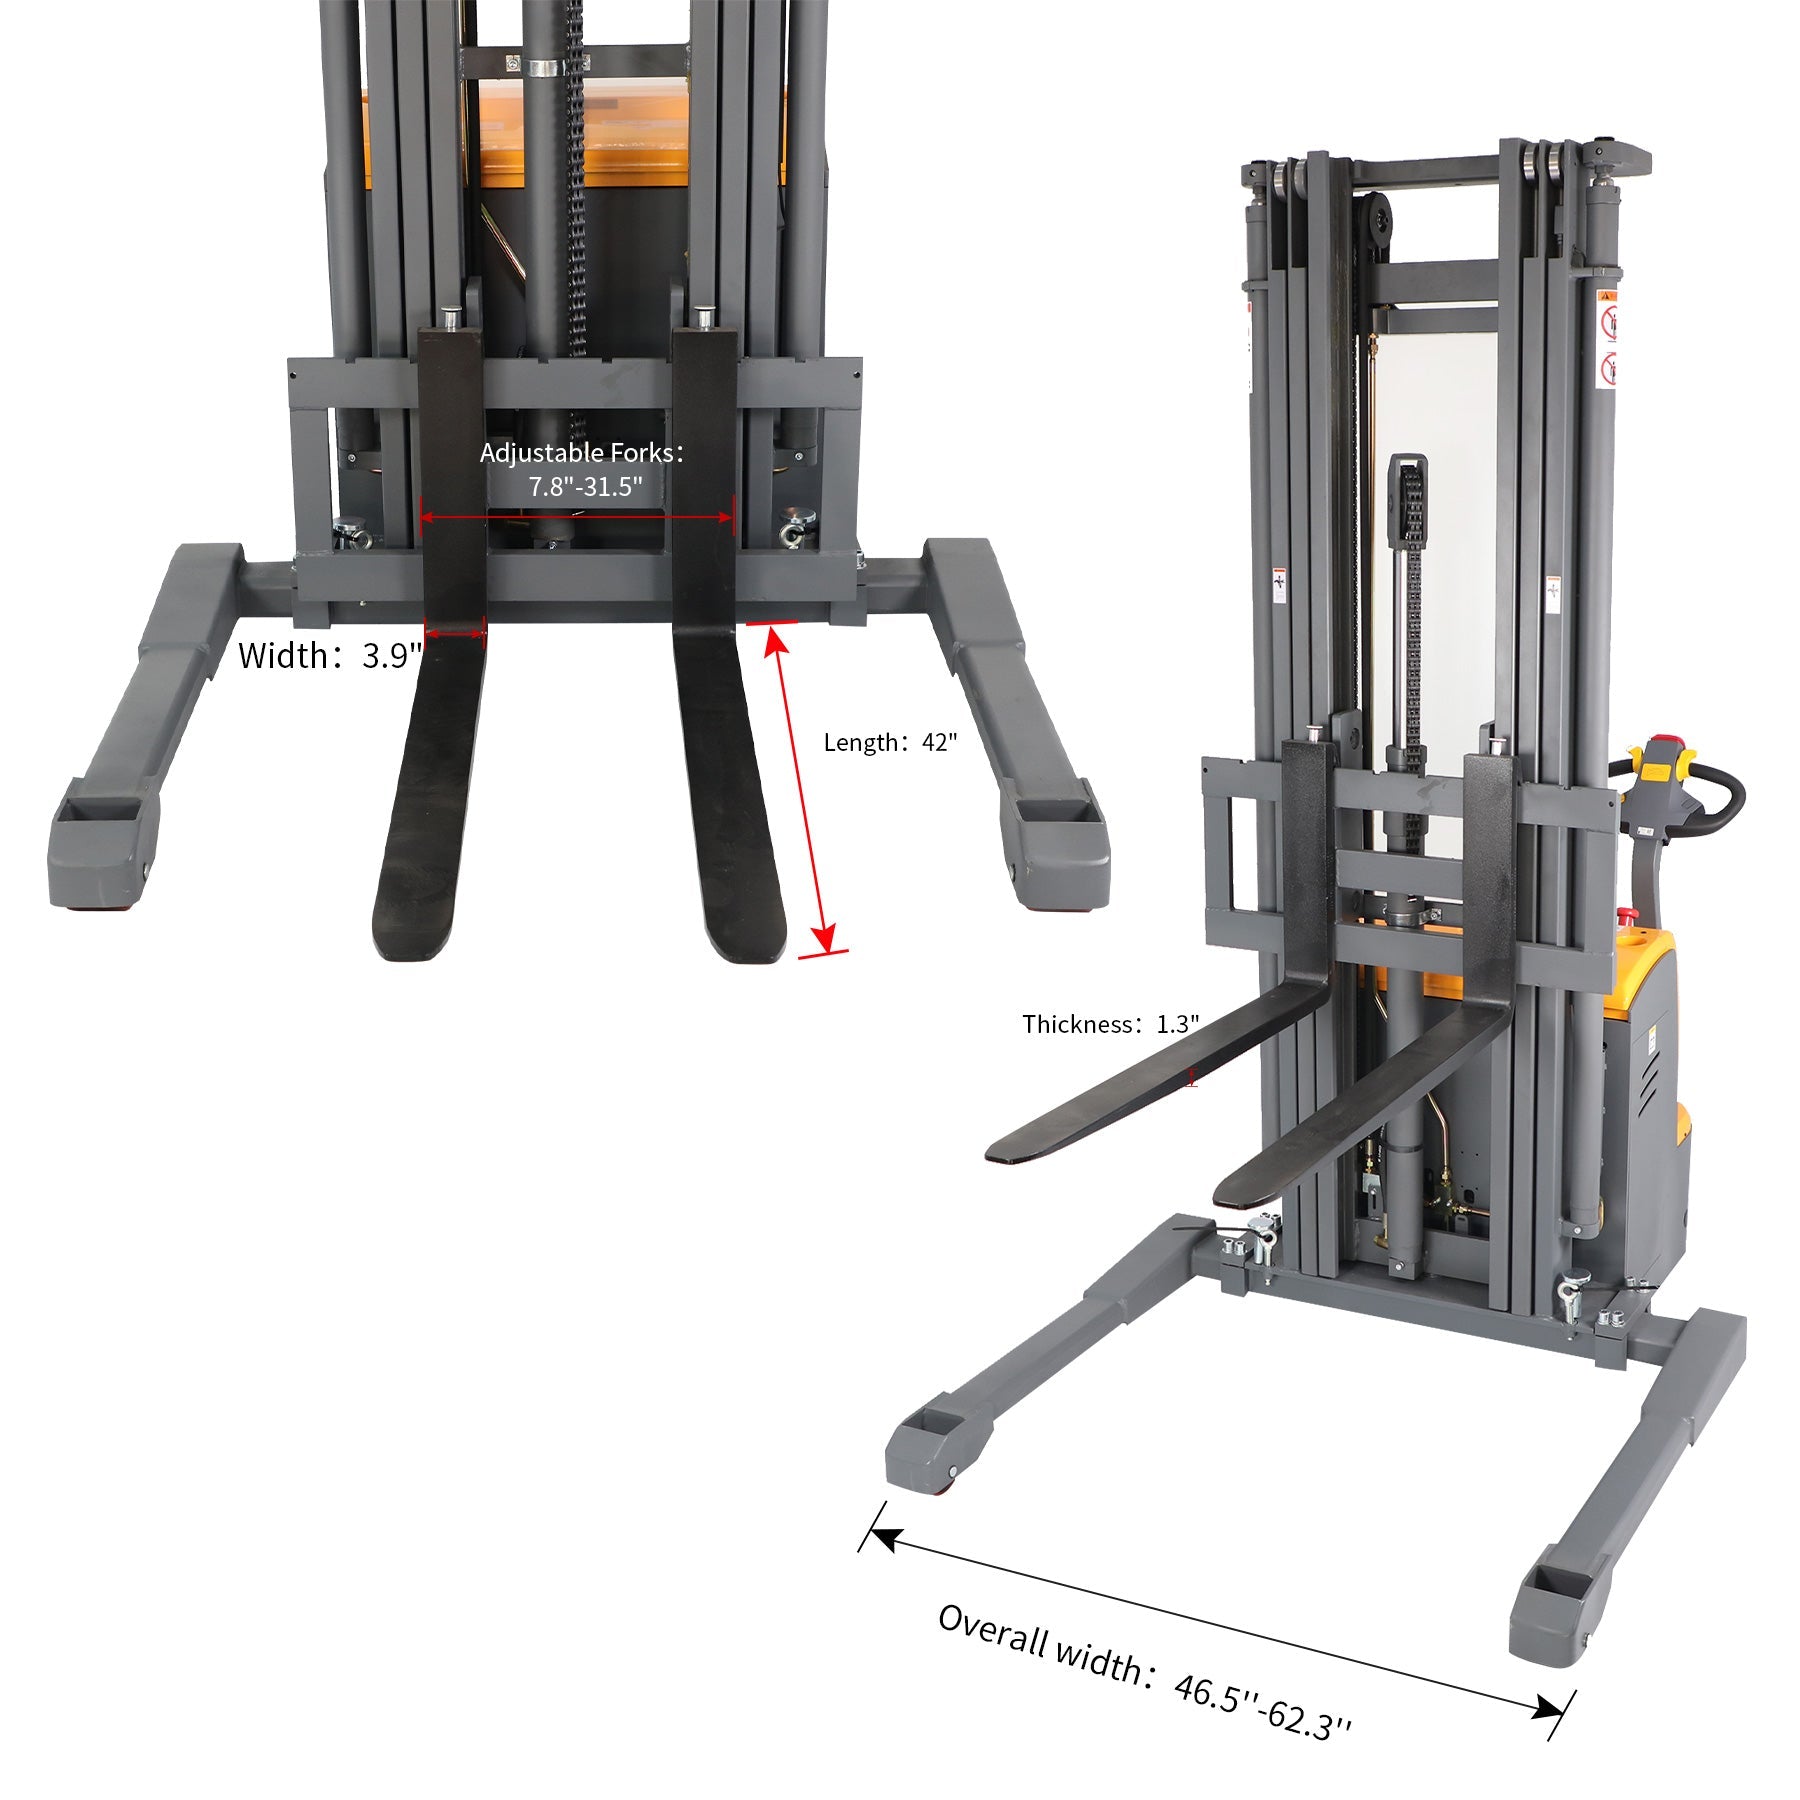 ApolloLift | Powered Forklift Full Electric Walkie Stacker 3300 lbs Cap. 177"Lifting A-3029